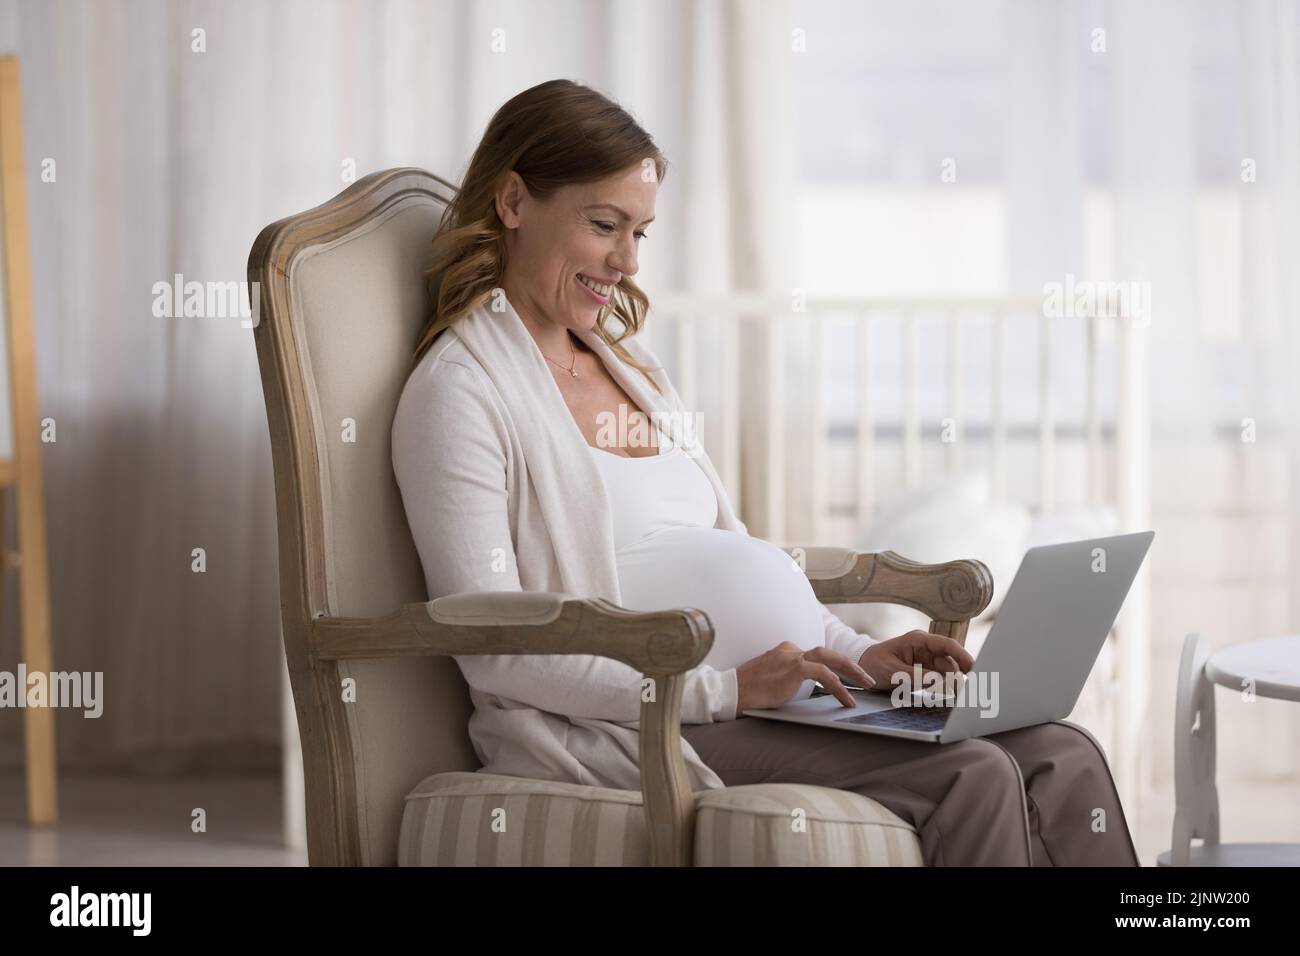 Young pregnant smiling woman relax on armchair with laptop Stock Photo